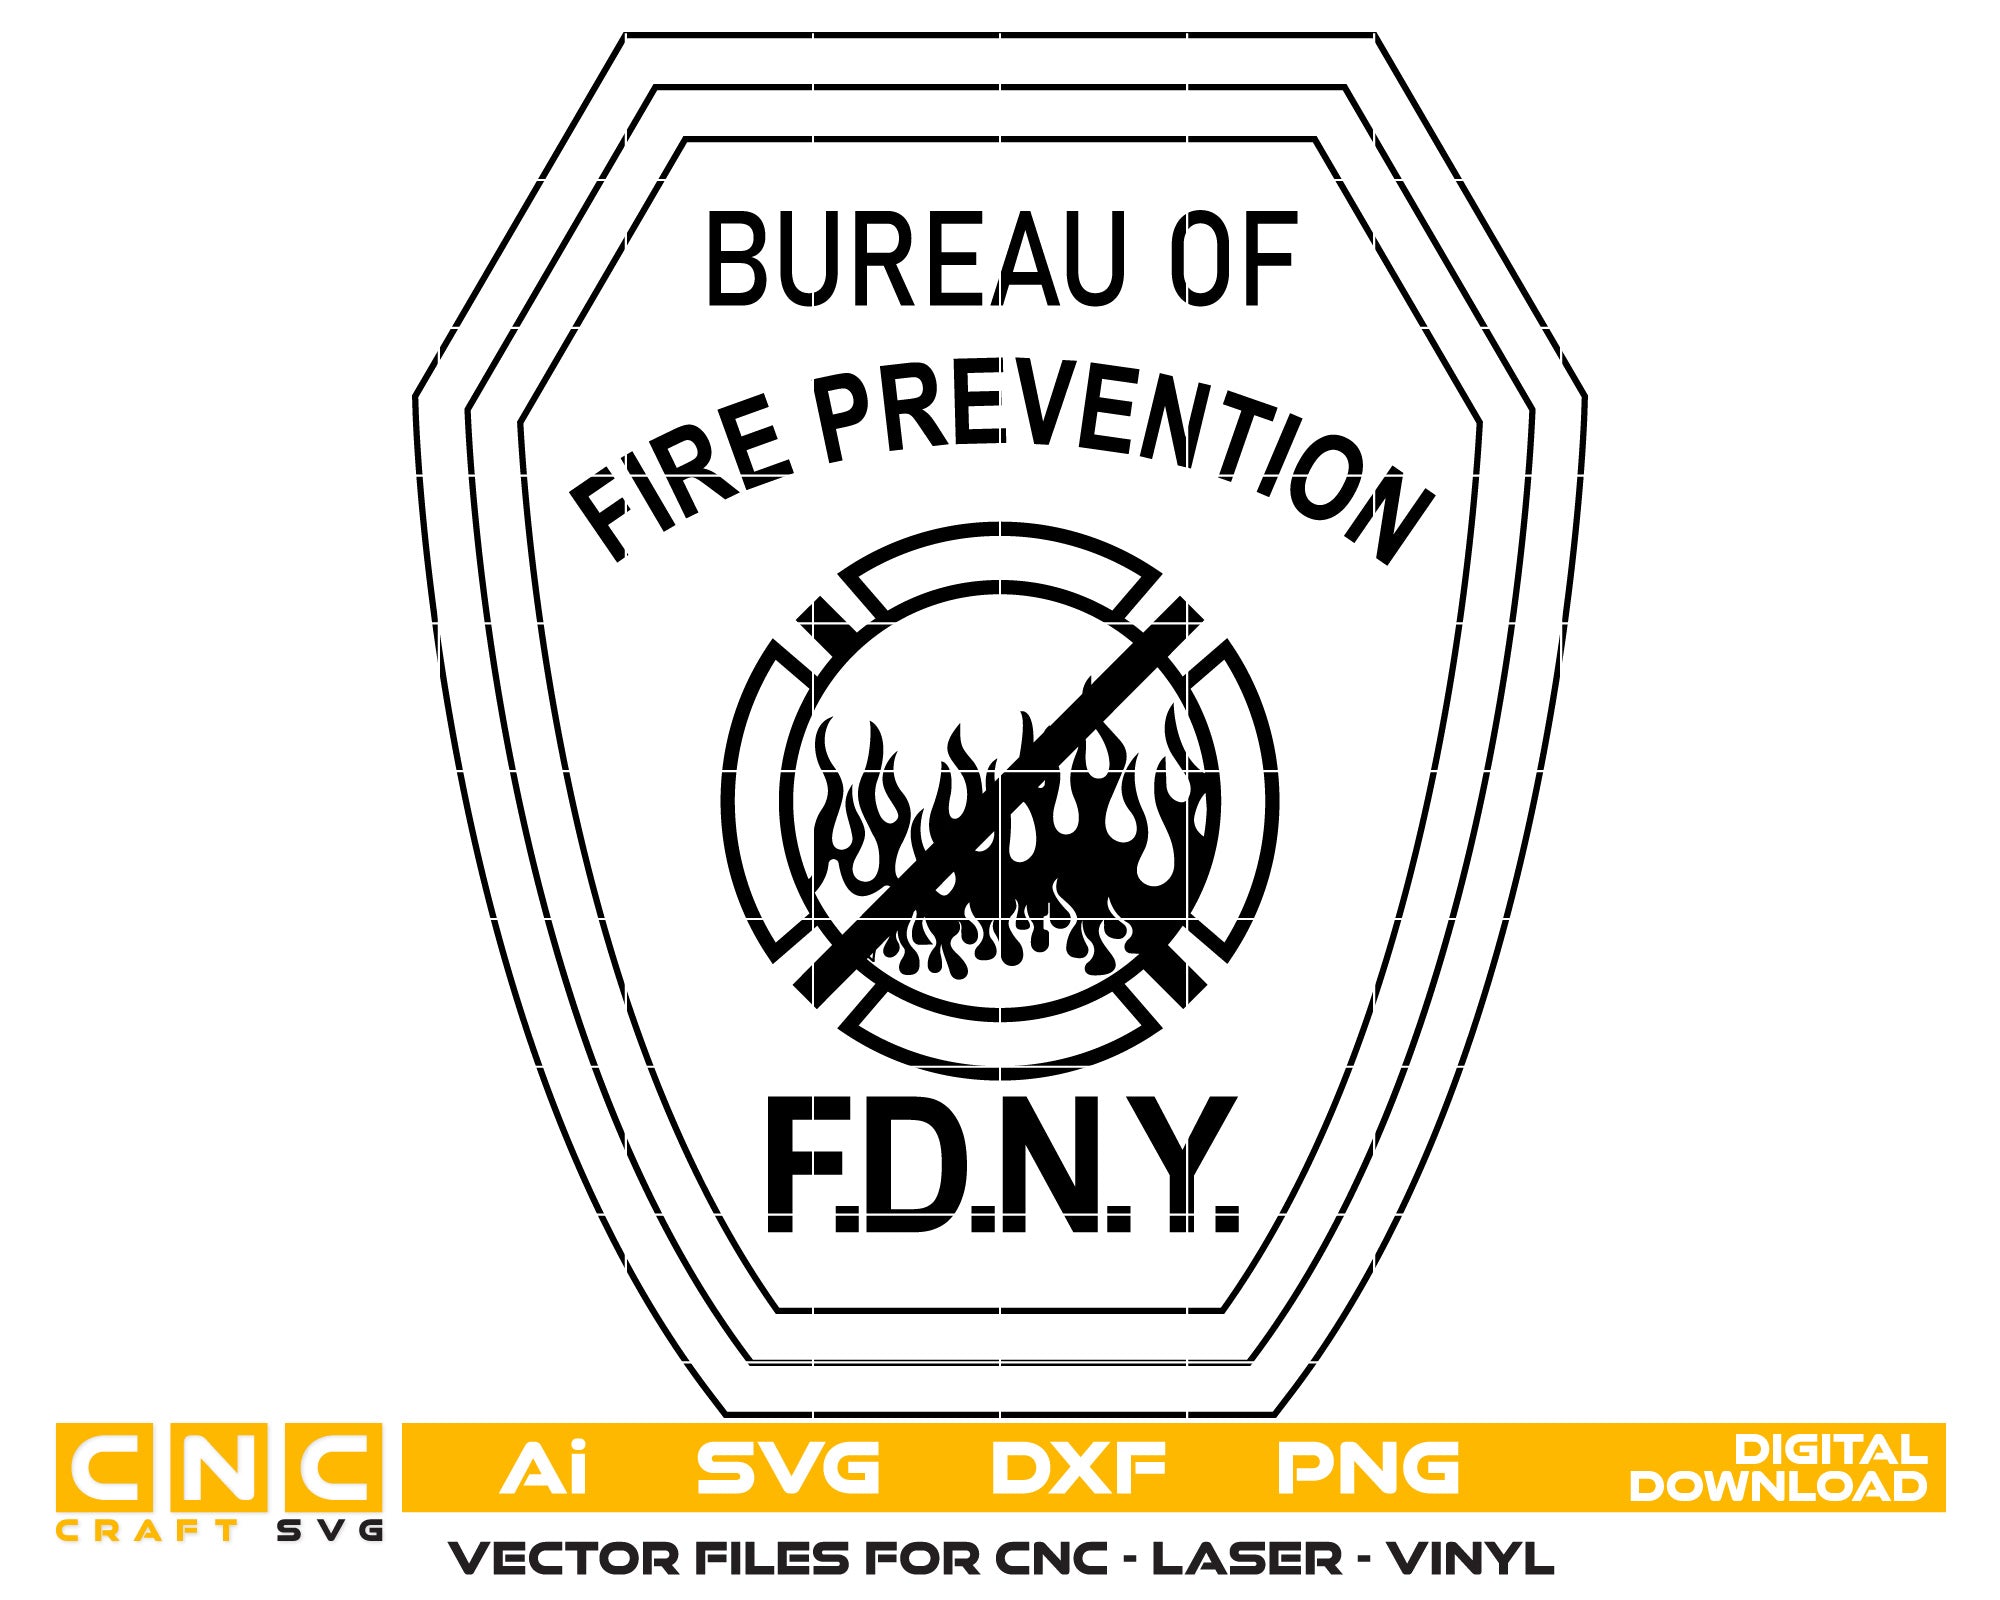 Bureau of Fire Prevention NY Vector Art, Ai,SVG, DXF, PNG, Digital Files